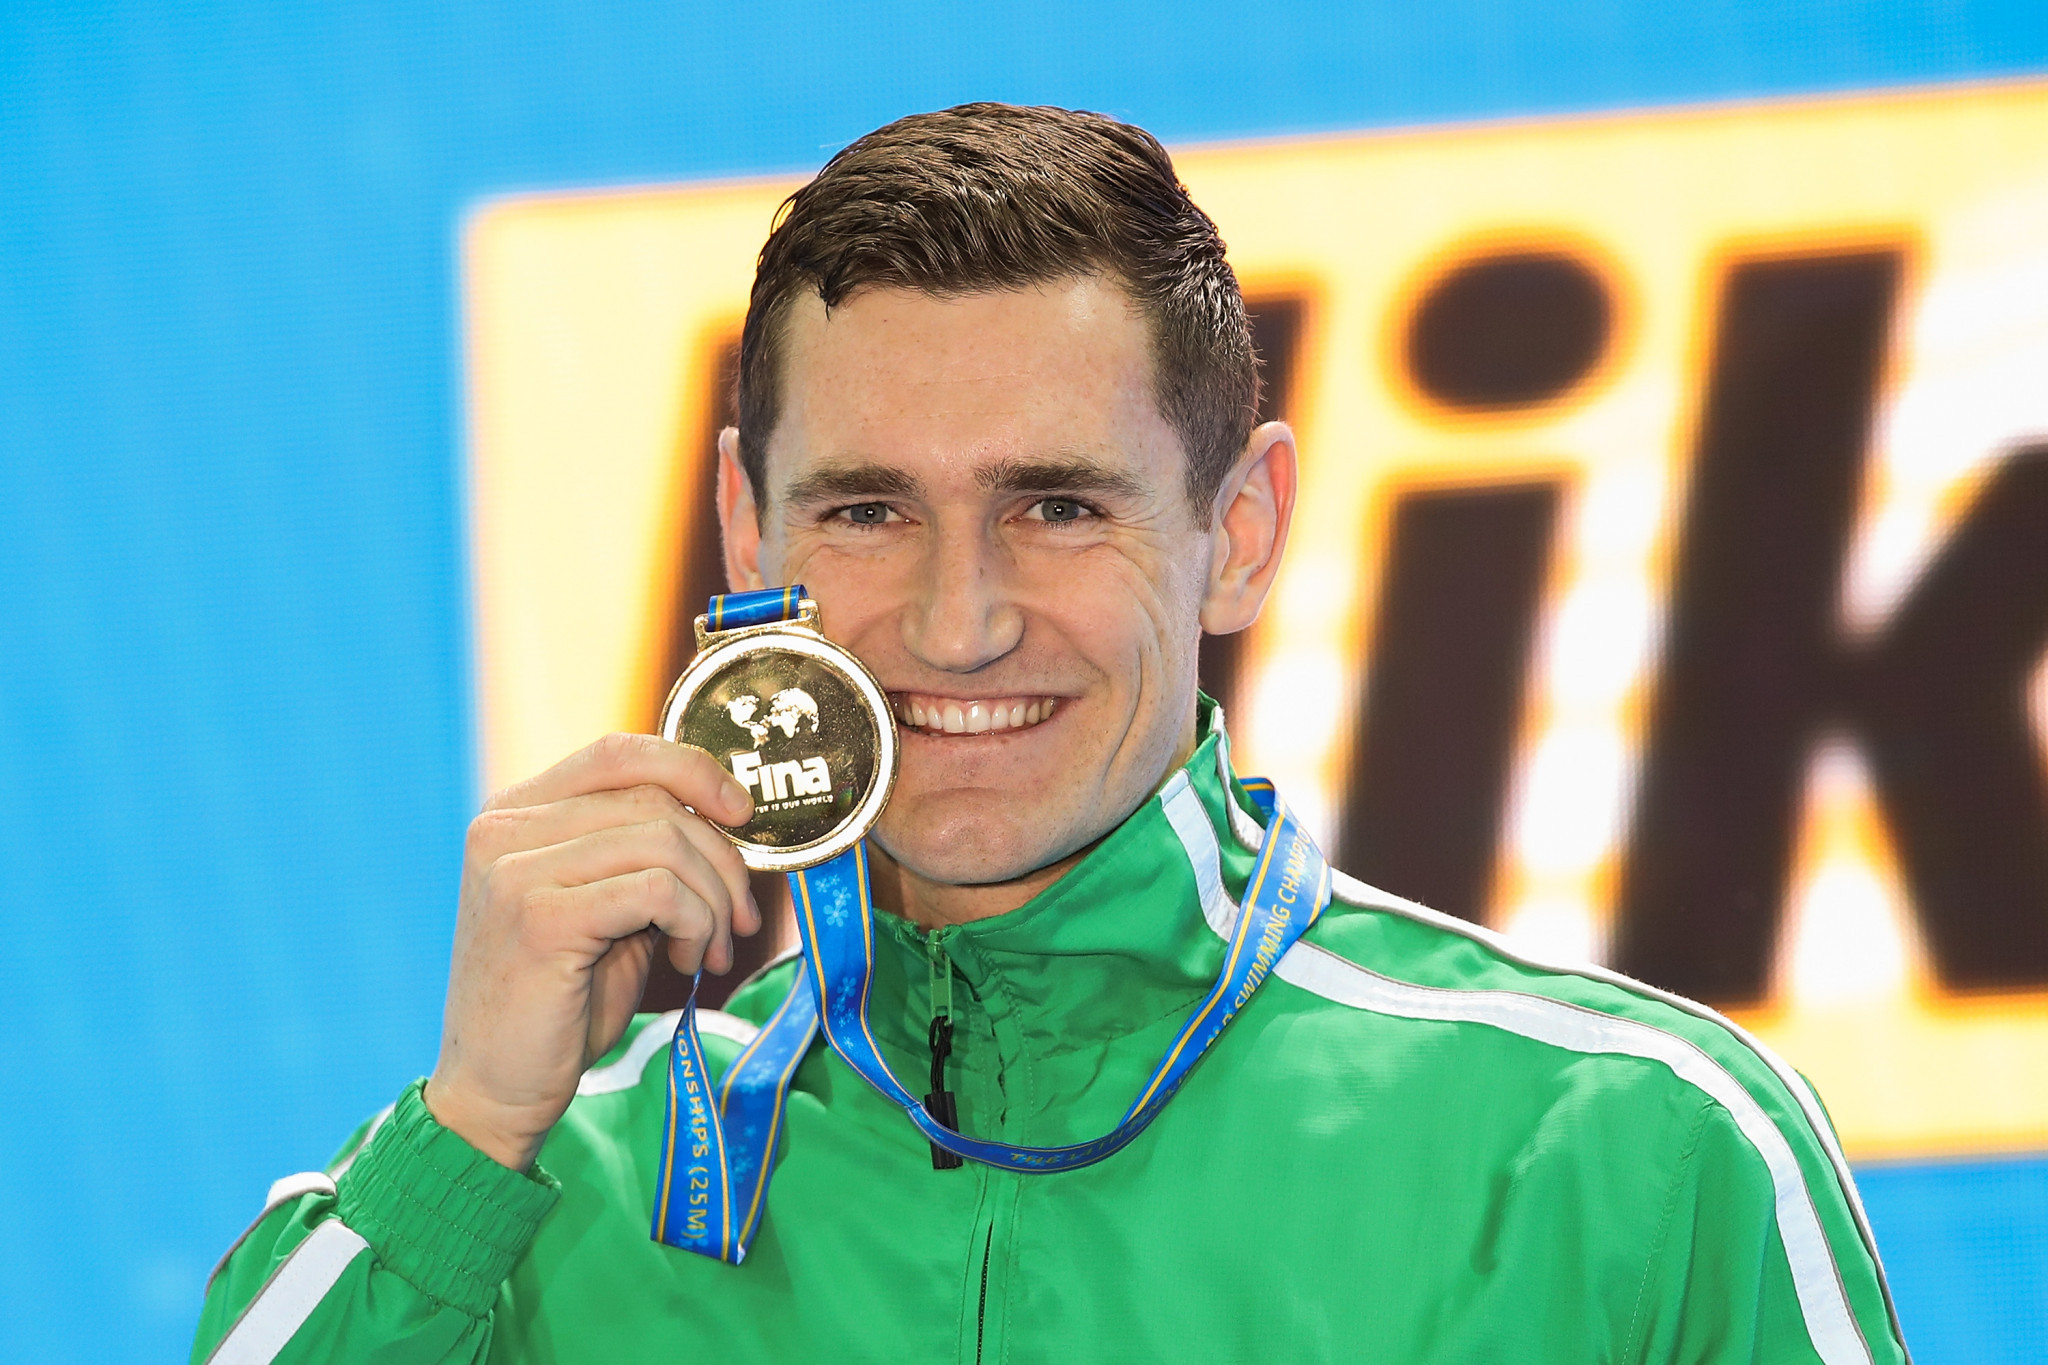 South Africa's Cameron van der Burgh ended his career with gold in the 50m breaststroke final ©Getty Images